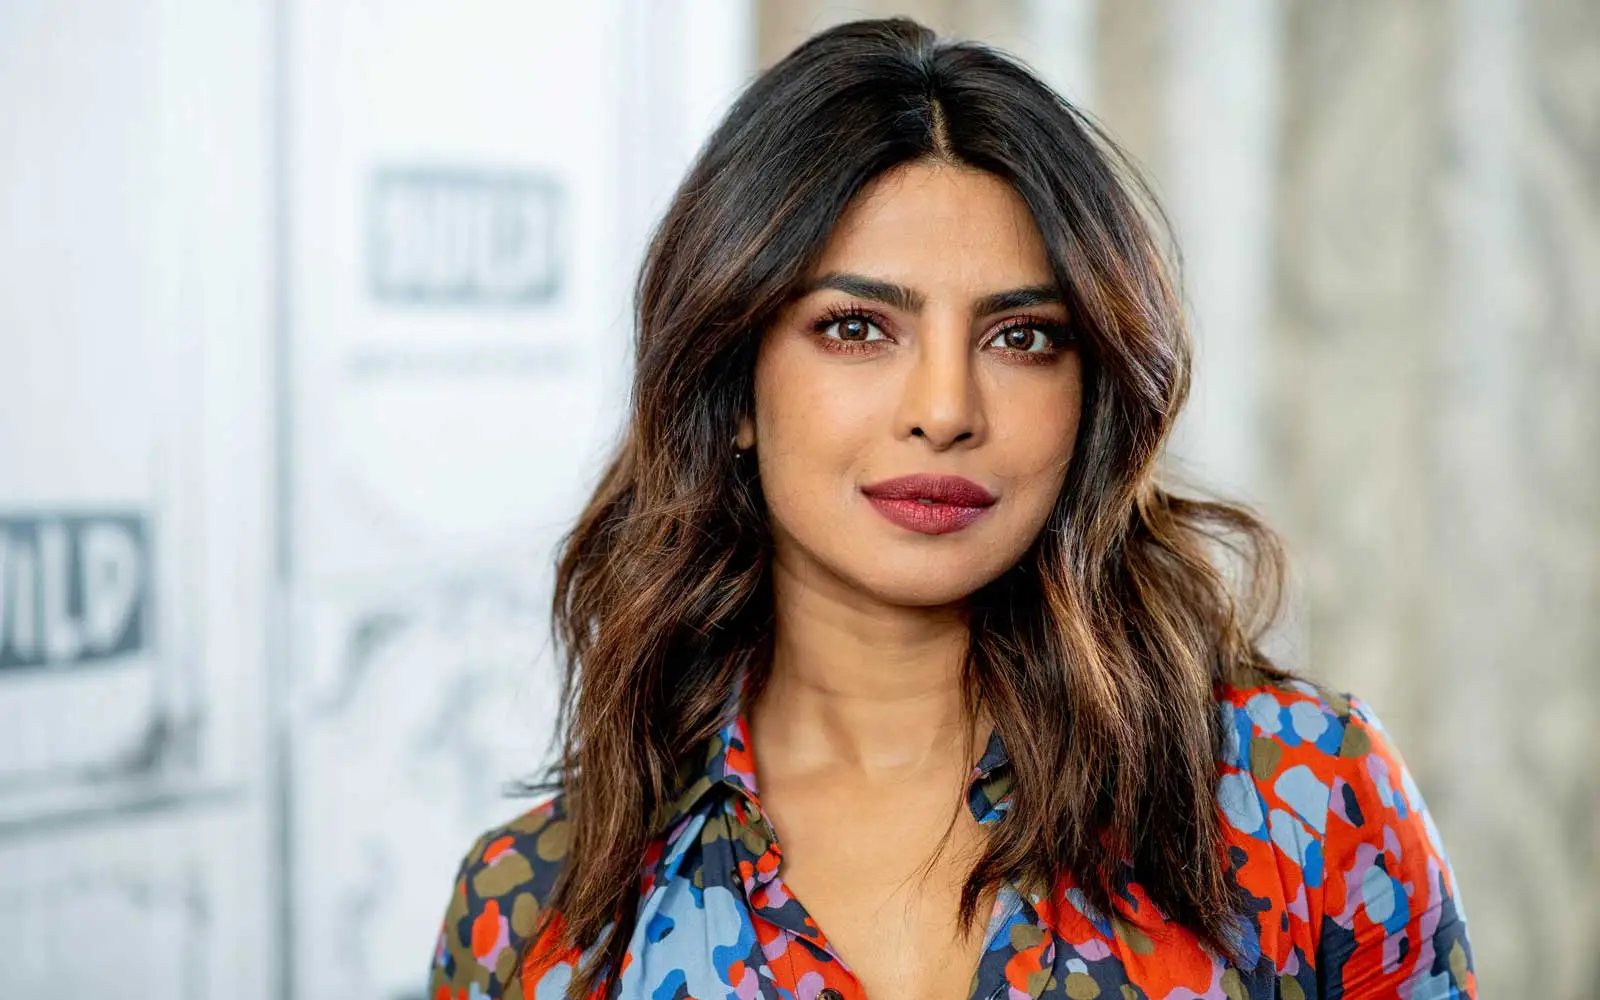 NEW YORK, NY - APRIL 26:  Priyanka Chopra discusses "Quantico" with the Build Series at Build Studio on April 26, 2018 in New York City.  (Photo by Roy Rochlin/WireImage)